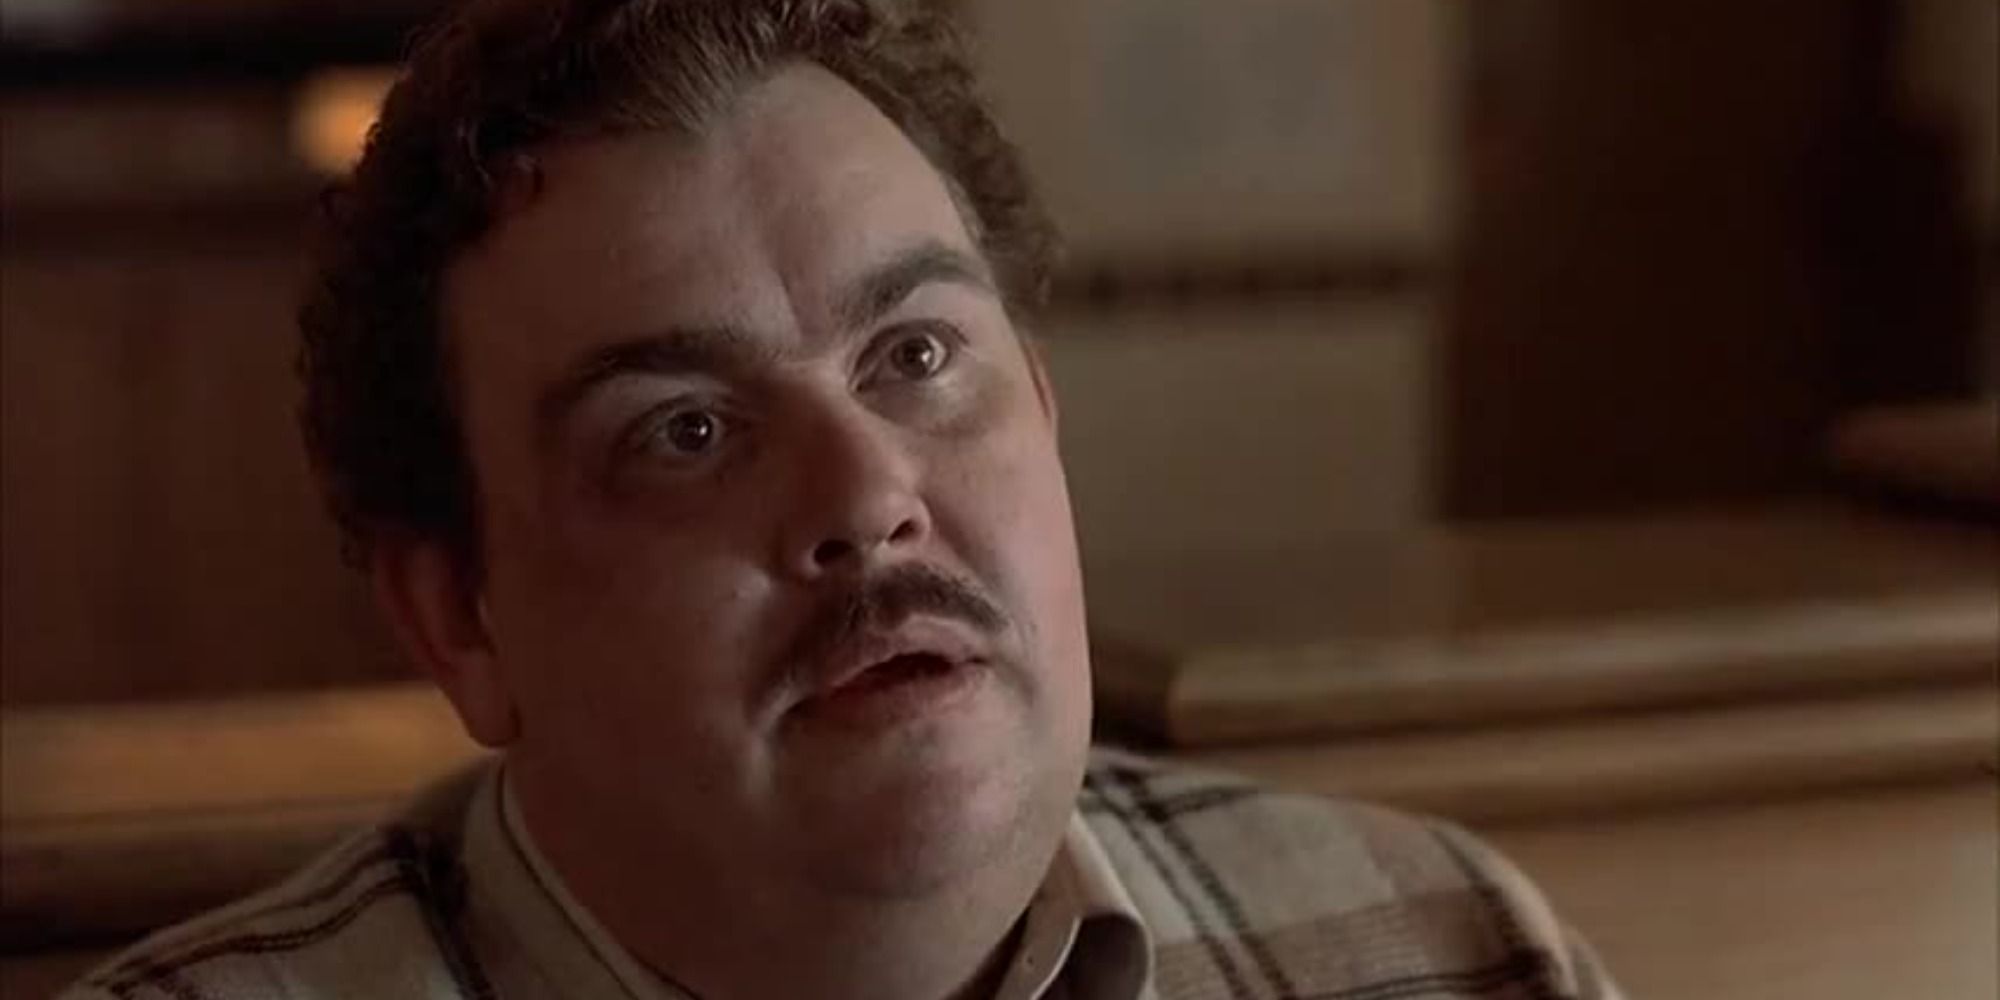 John Candy at the end of Planes Trains and Automobiles